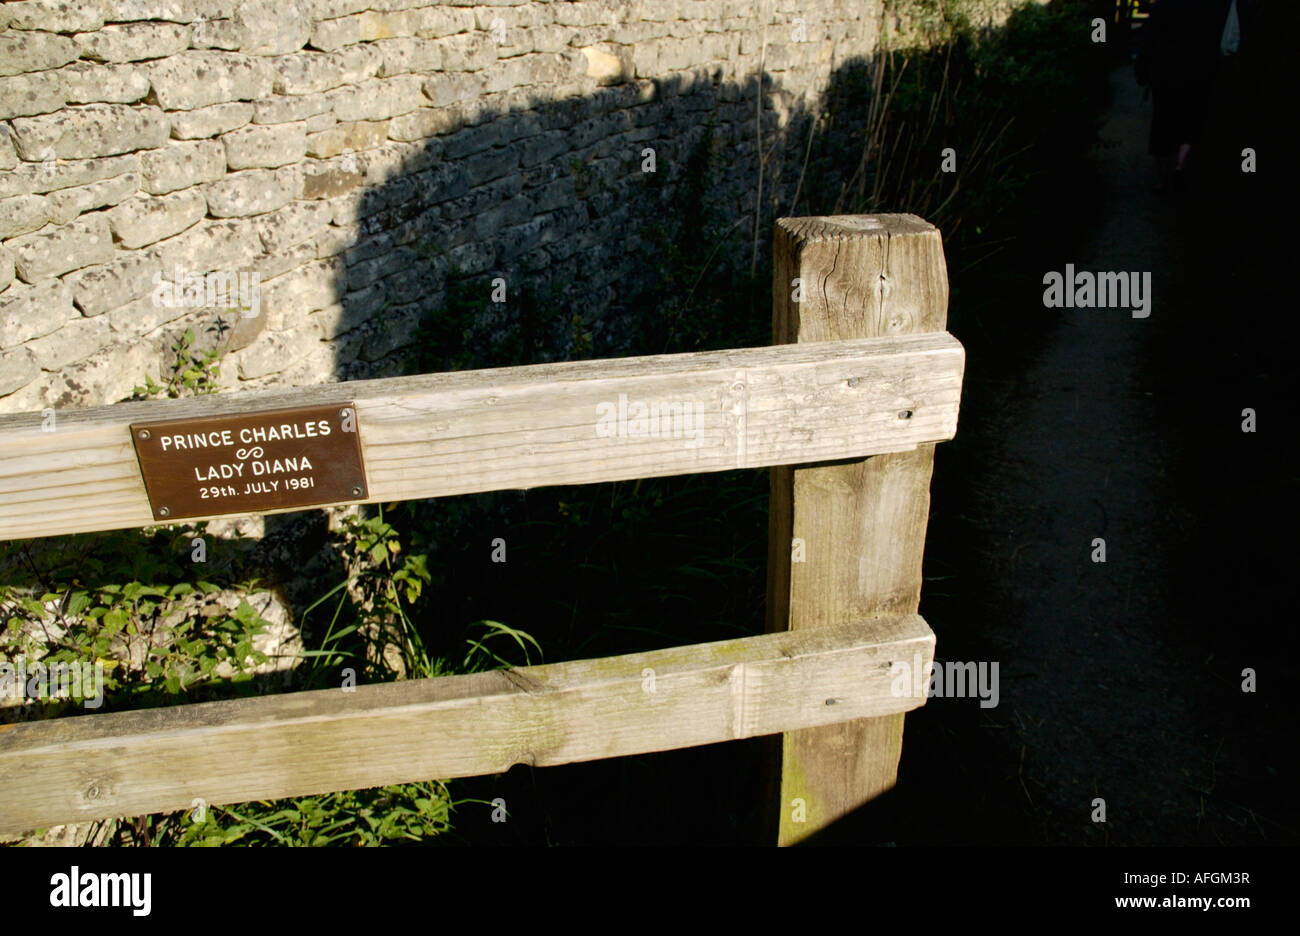 Prince Charles and Lady Diana sign on gate in pretty Cotswold village of Lower Slaughter Gloucestershire England UK Stock Photo